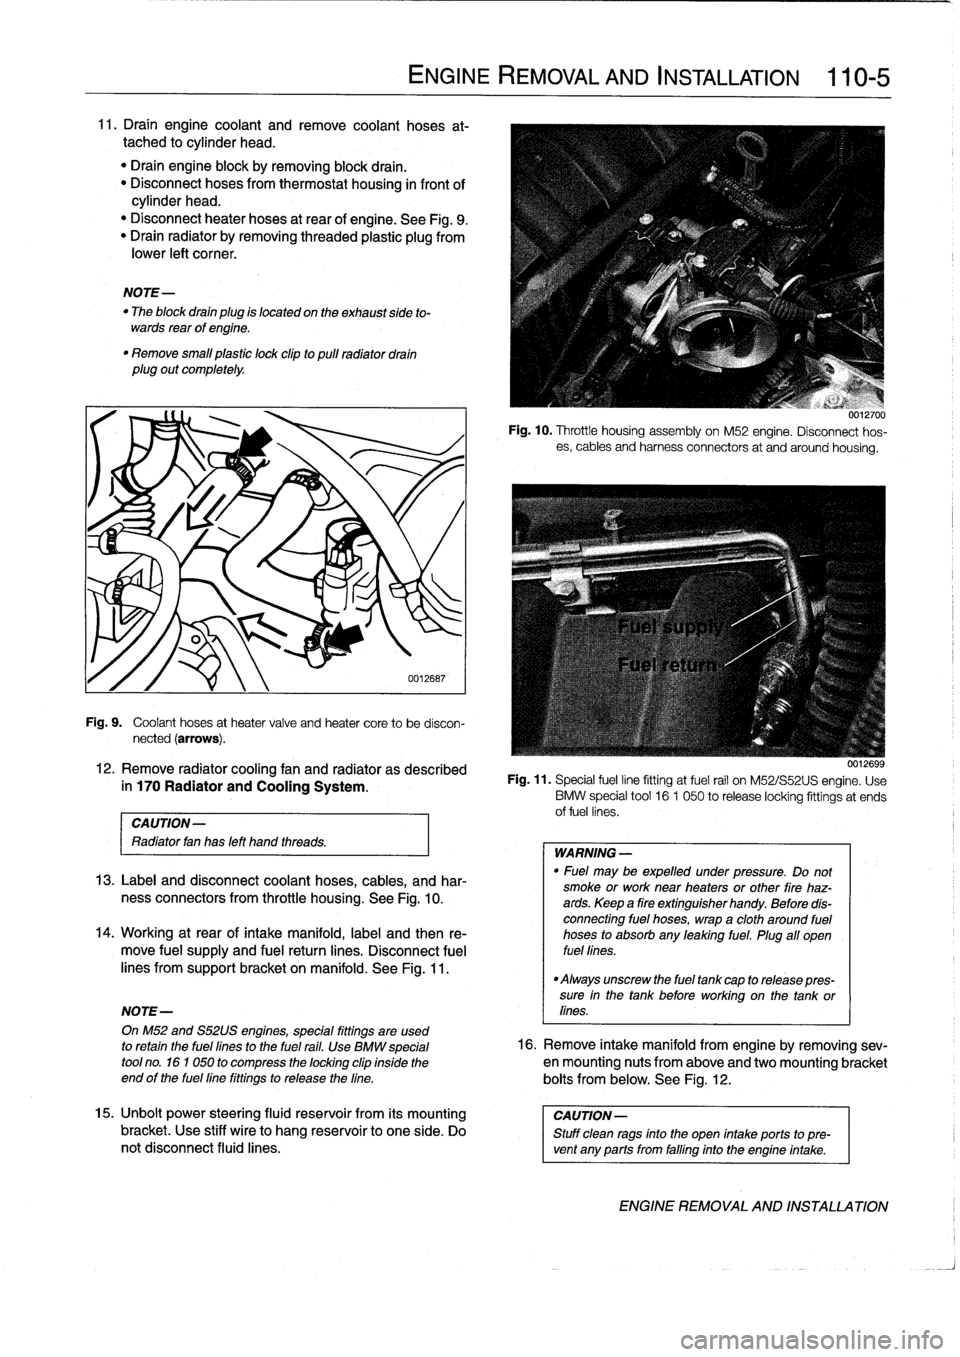 BMW 328i 1994 E36 Workshop Manual 
11
.
Draín
engine
coolant
and
Rmove
coolant
hoses
at-
tached
to
cylinder
head
.

"
Drain
engine
block
byremoving
block
drain
.
"
Disconnect
hoses
from
thermostat
housing
in
front
of
cylinder
head
.
